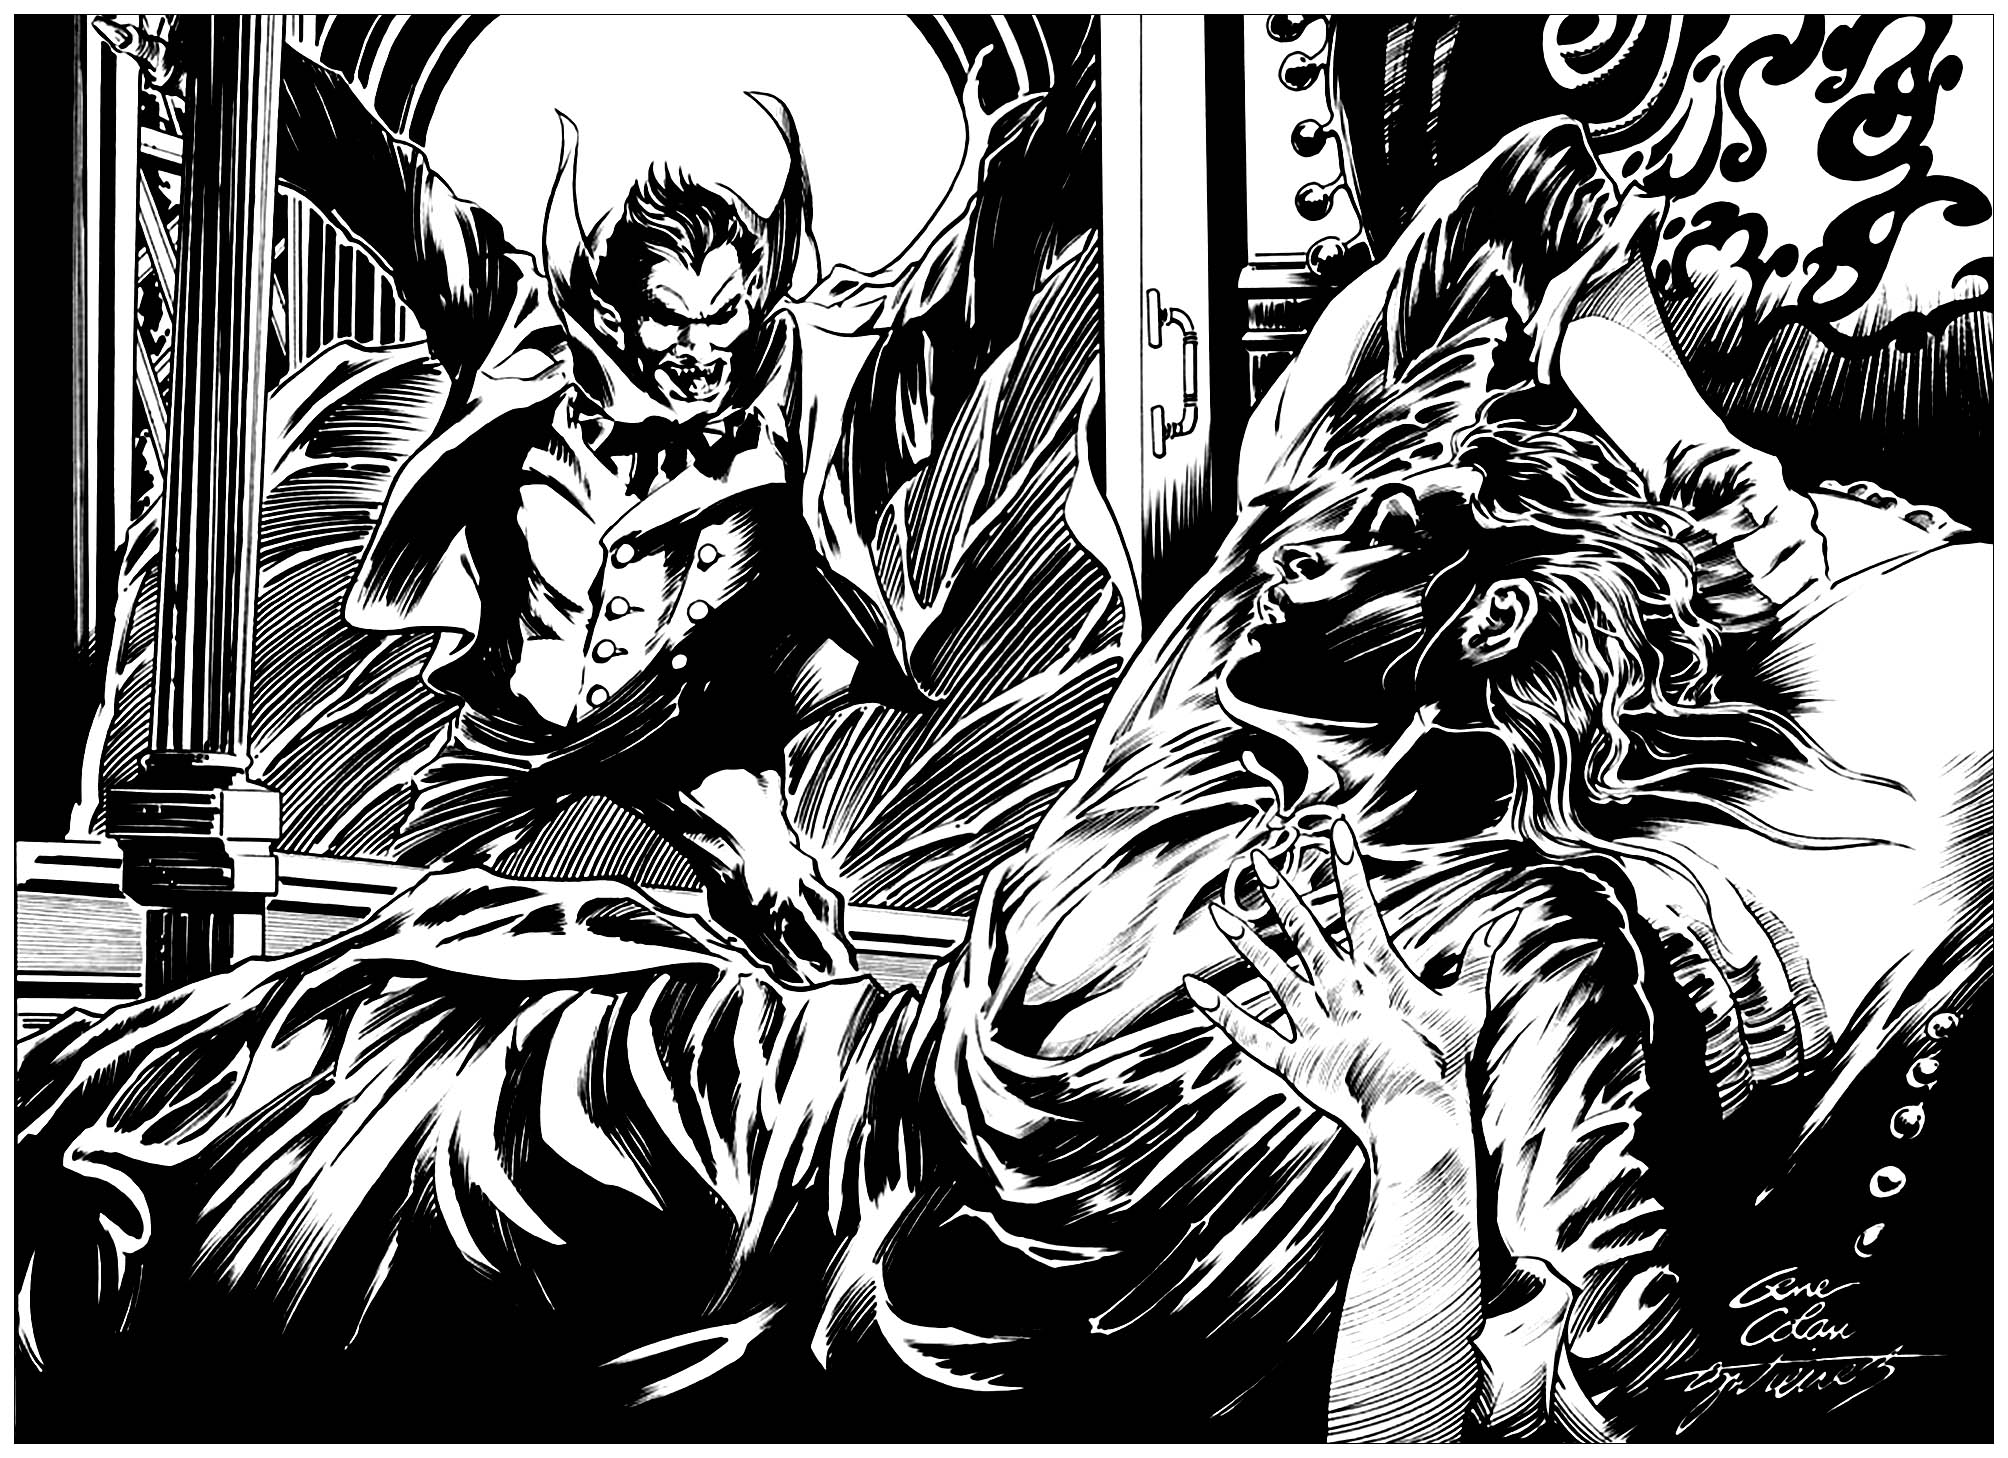 Illustration inspired by Dracula, by Gene Colan